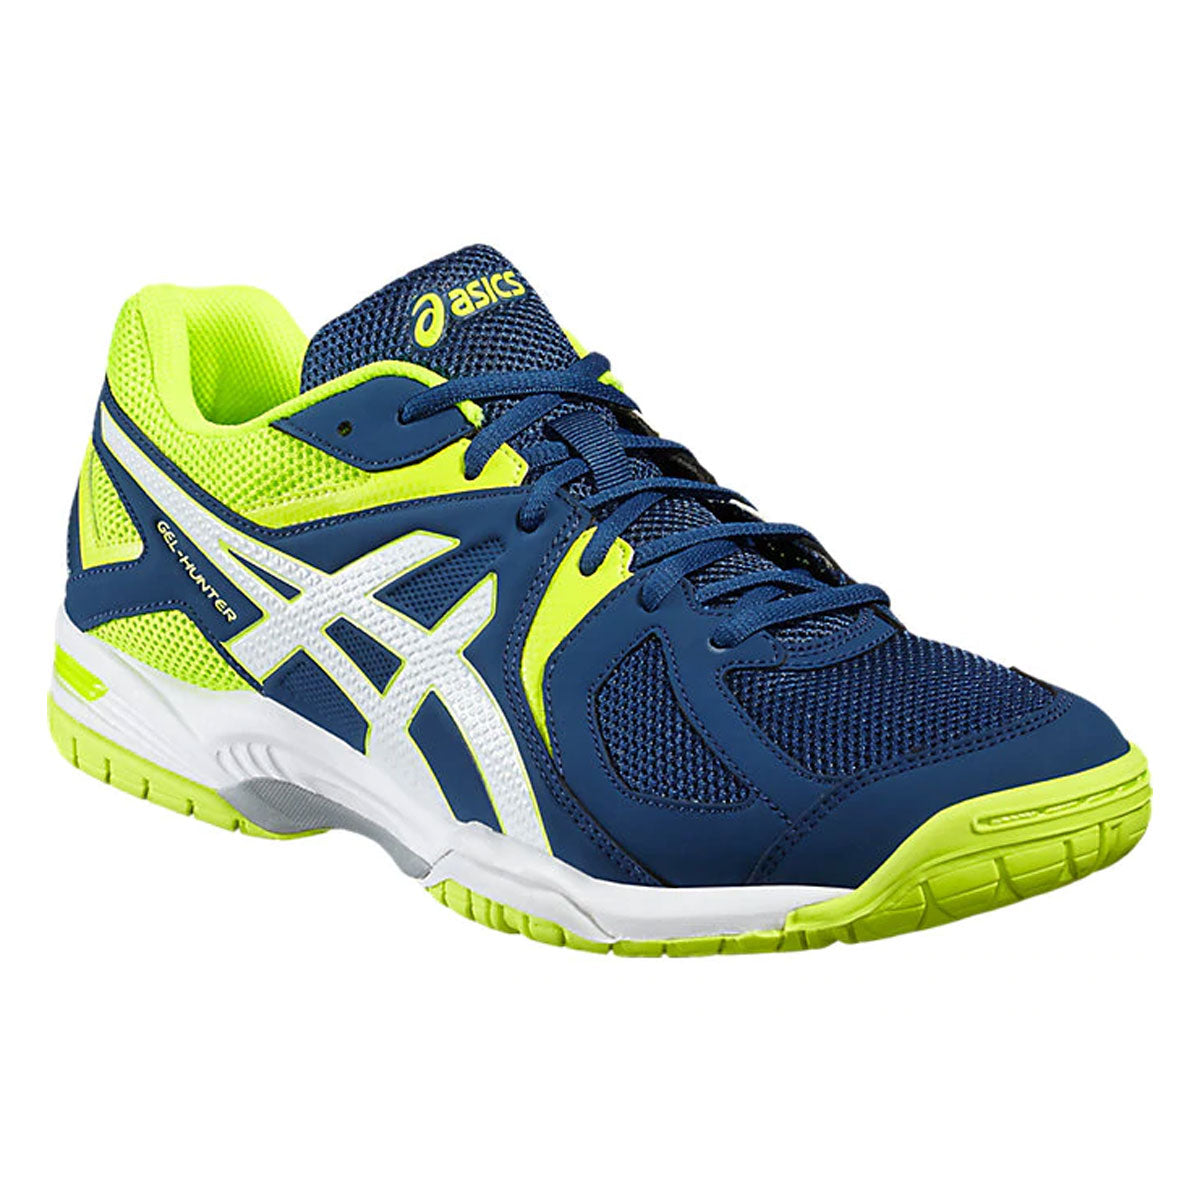 asic indoor shoes